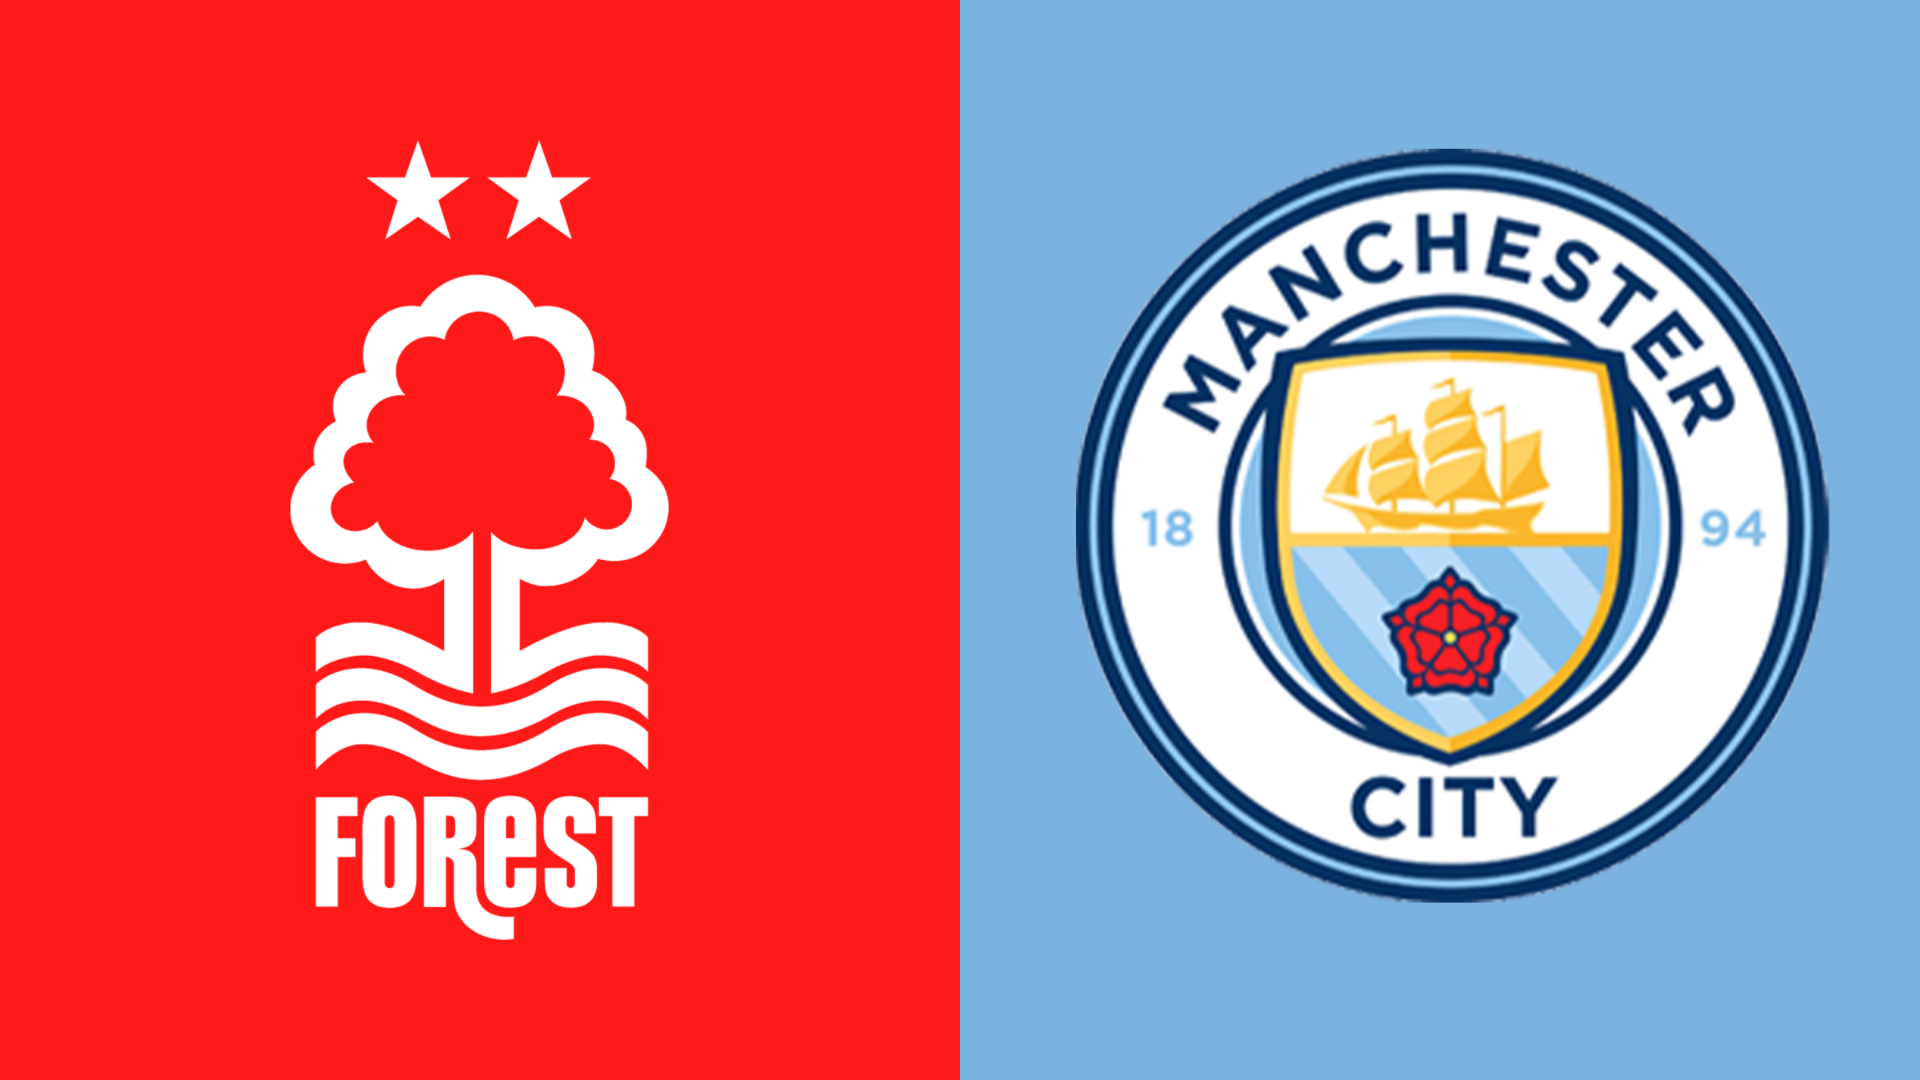 Nottingham Forest v Manchester City preview: Team news, head to head and stats